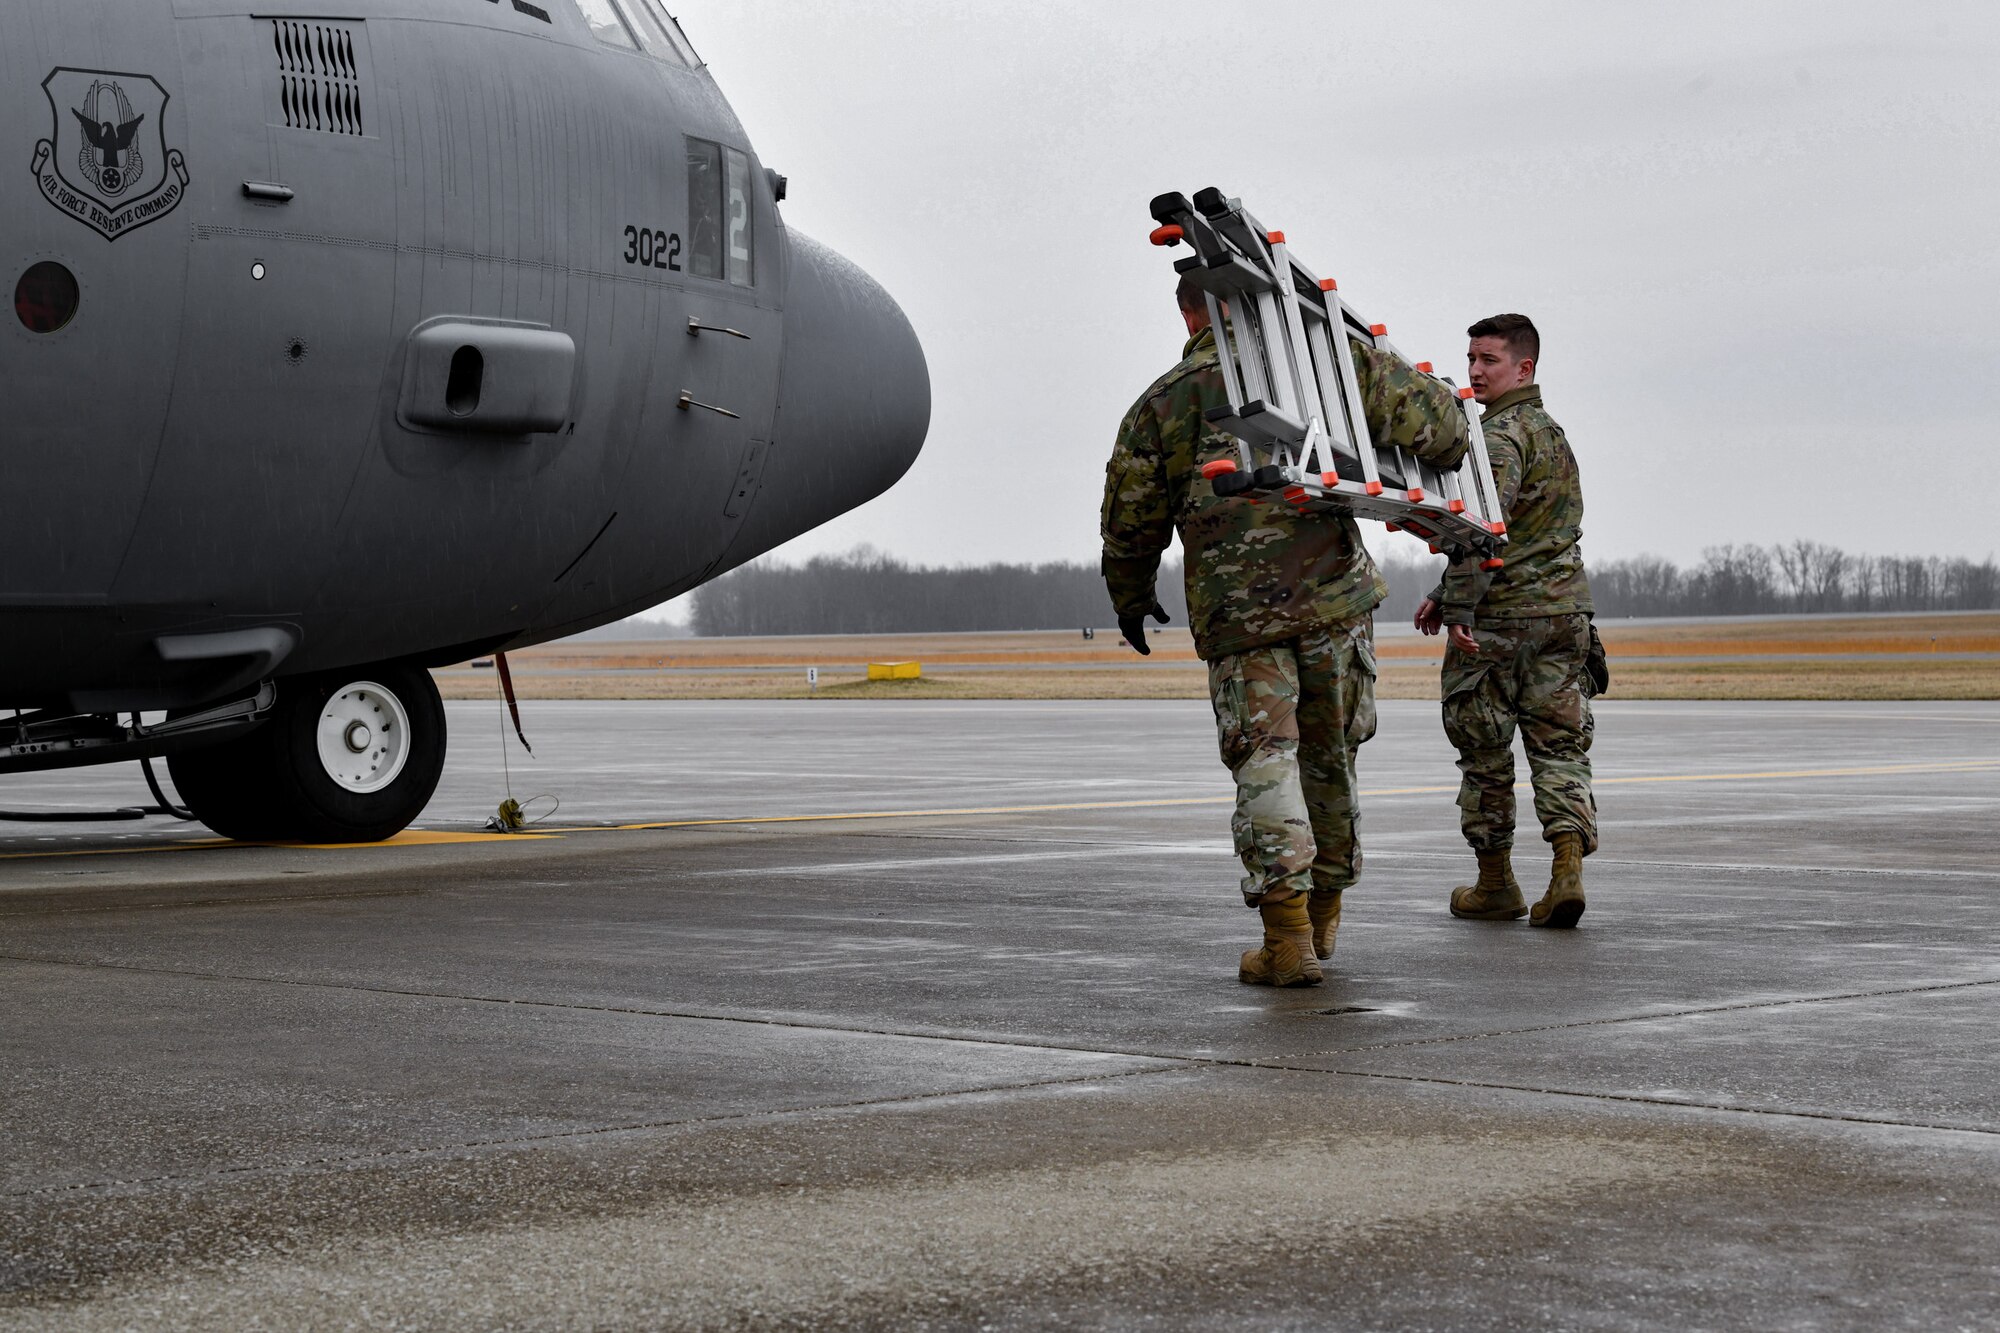 Master Sgt. Gerald Christy, an aircraft maintenance craftsman assigned to the 910th Aircraft Maintenance Squadron, and Senior Airman Creston Shirey, an aerospace maintenance journeyman assigned to the 910th AMXS, perform routine maintenance checks on Feb. 16, 2023, at Youngstown Air Reserve Station, Ohio.